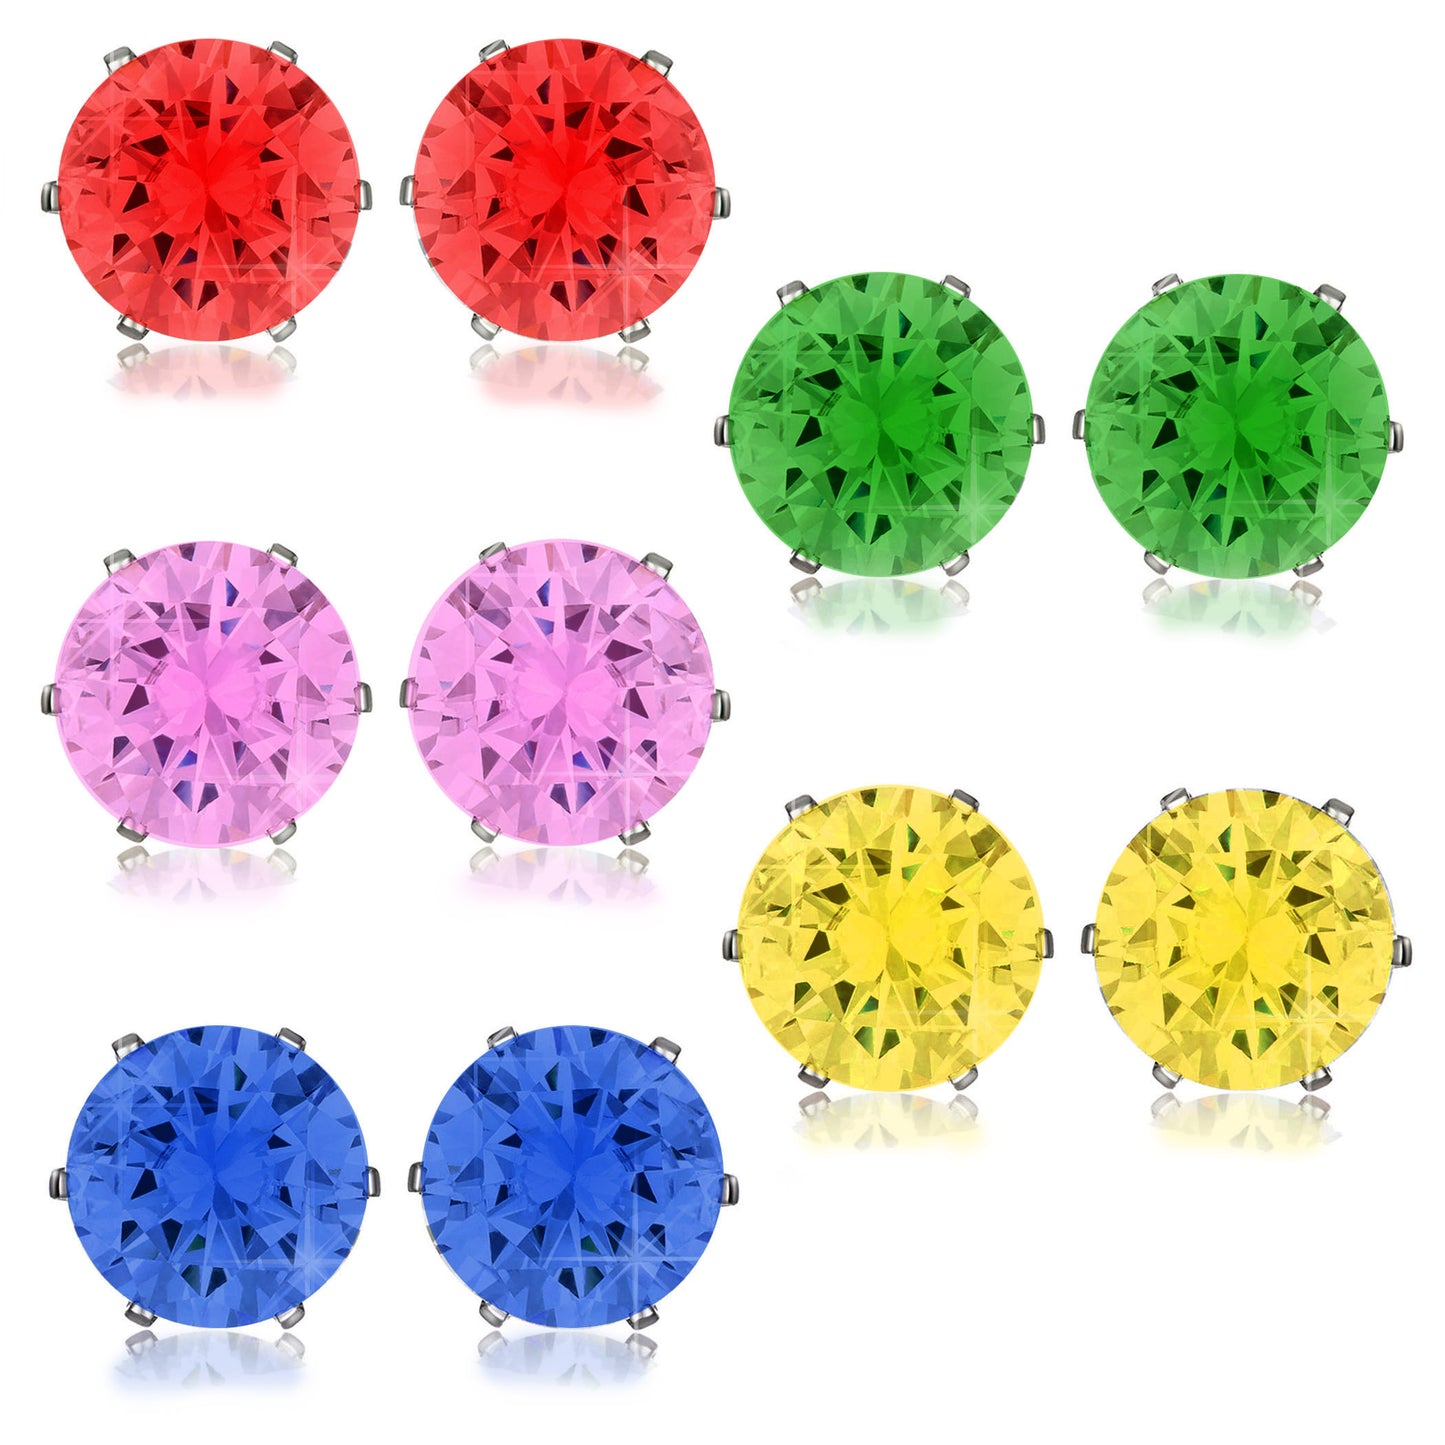 Red (Ruby), Green (Emerald), Pink, Yellow, Blue (Sapphire) Stainless Steel Stud Earring 7mm